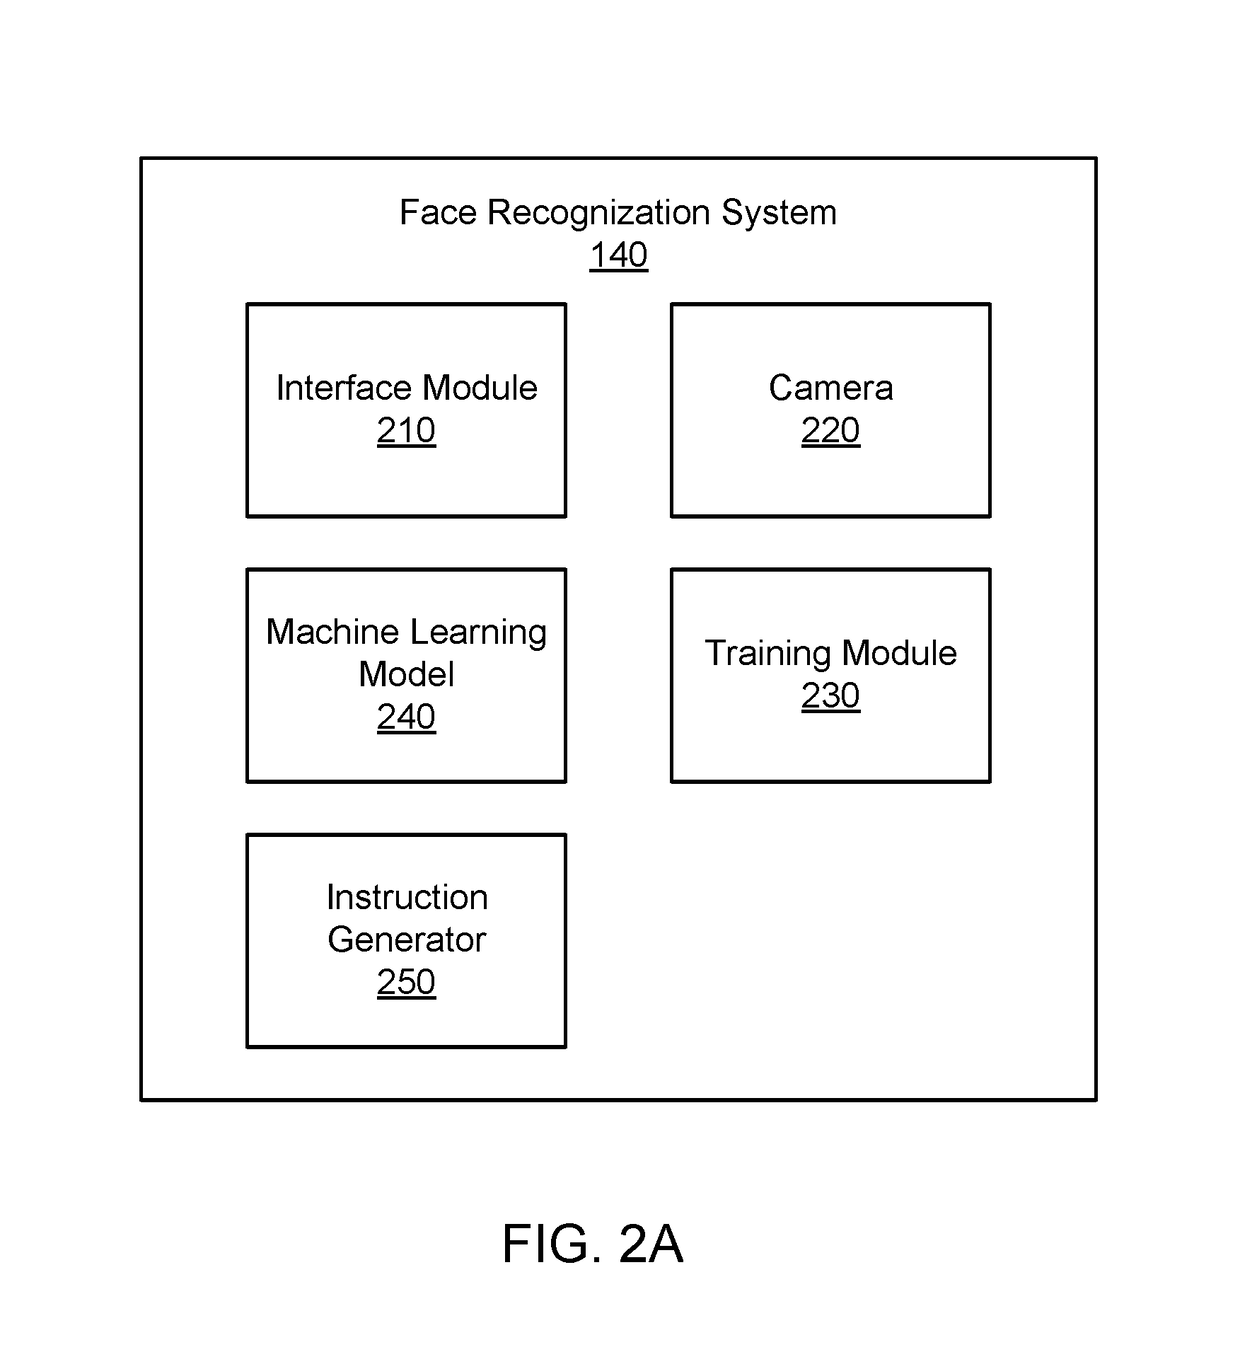 Face recognition in a residential environment